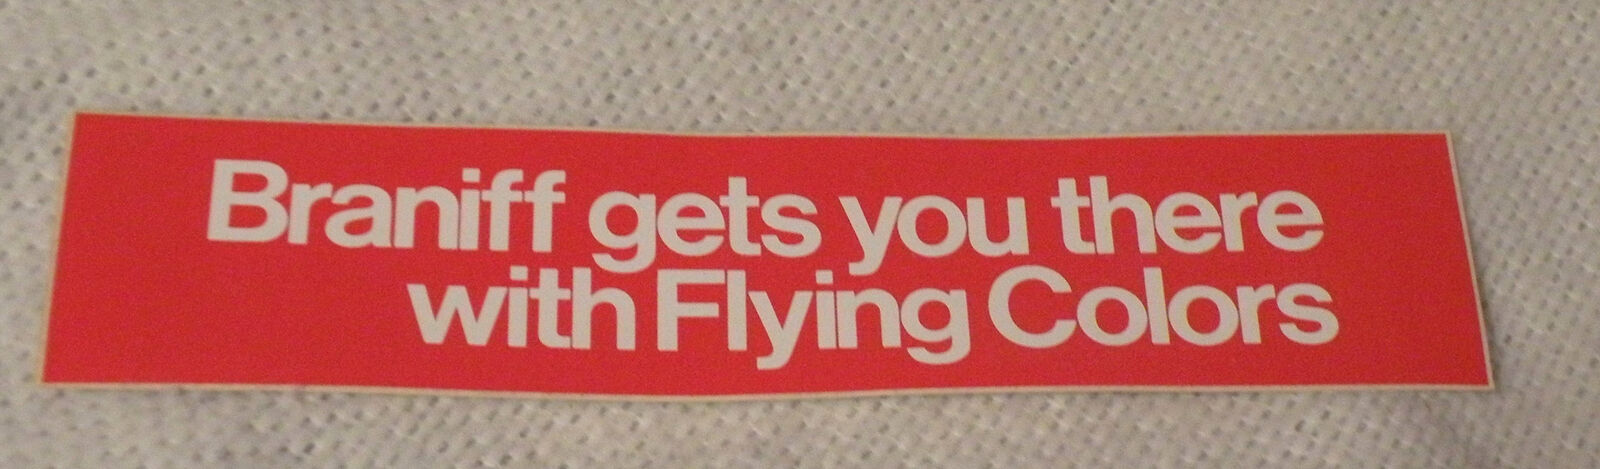 BRANIFF INTERNATIONAL AIRLINES VINTAGE BUMPER STICKER FLYING COLORS RED NOS